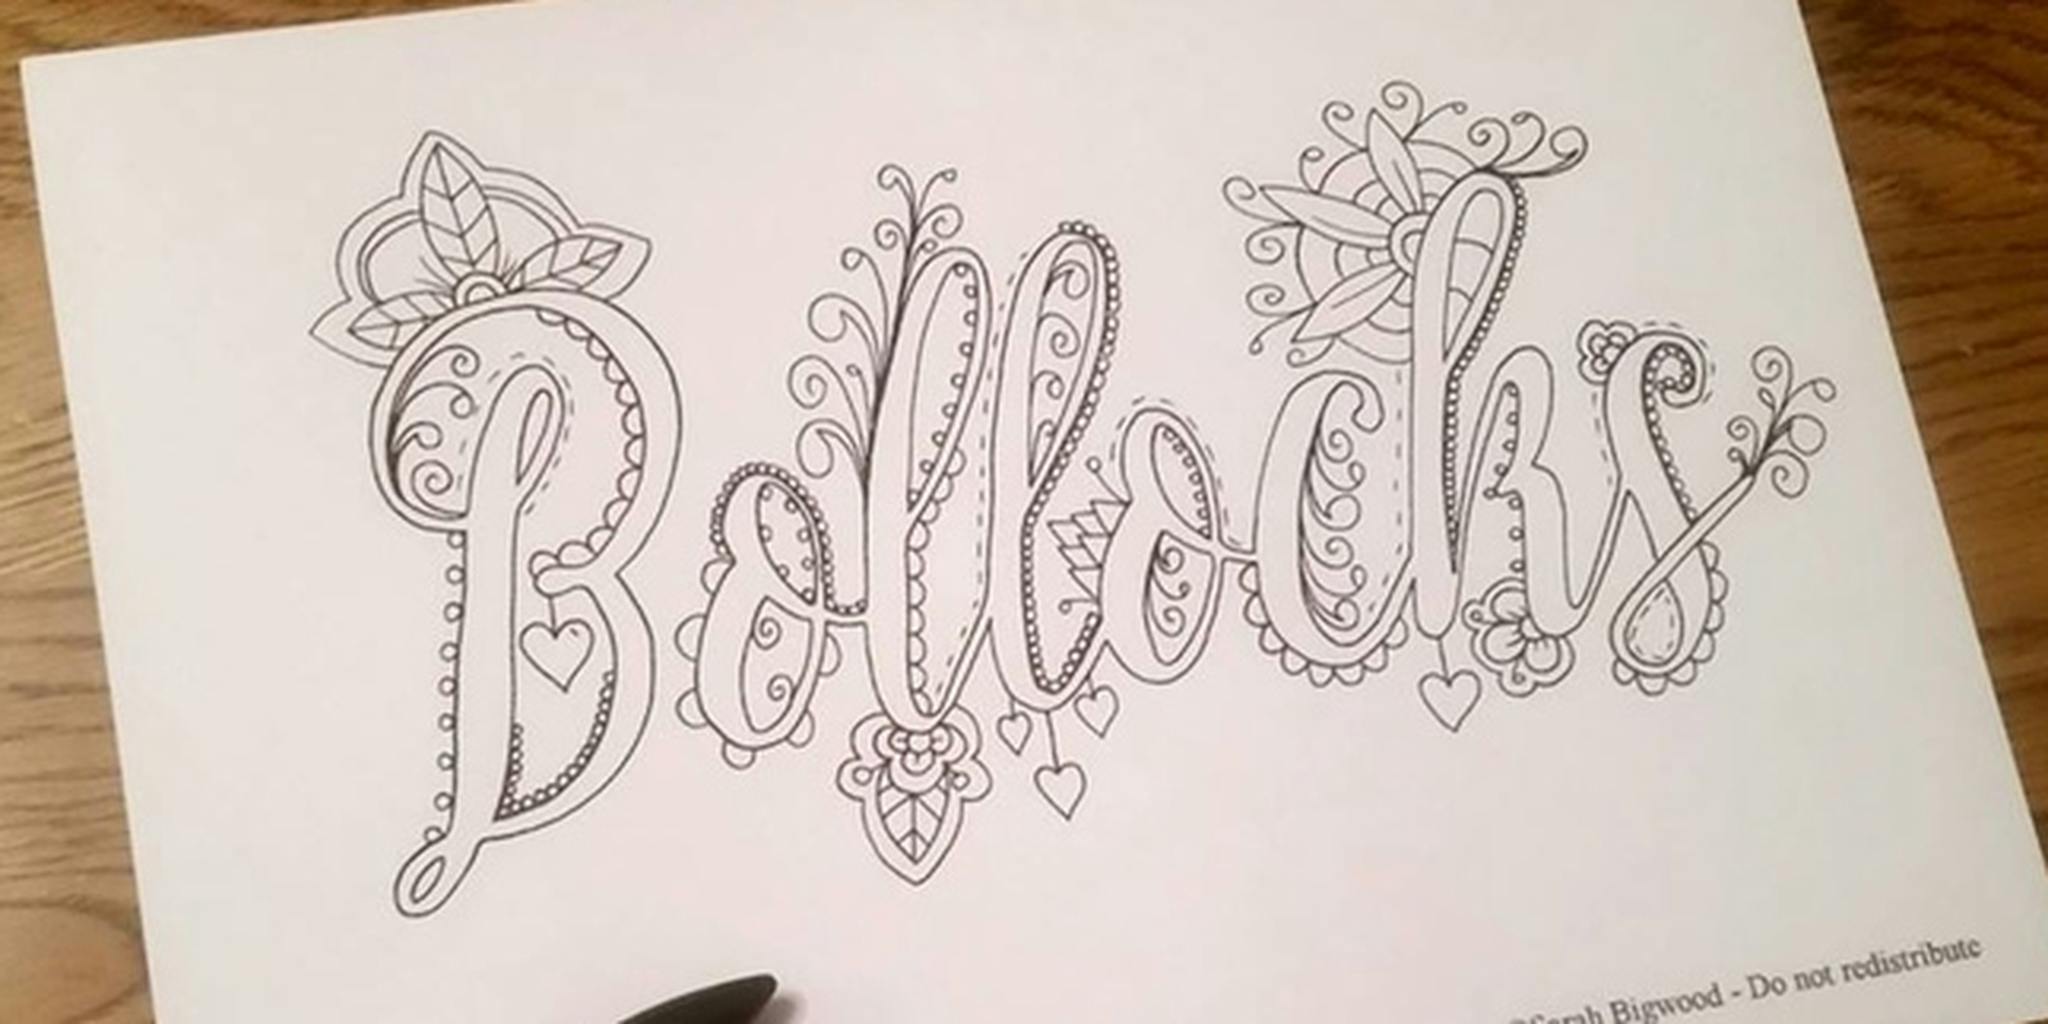 This Adult Coloring Book Is Just A Bunch Of British Swear Words 